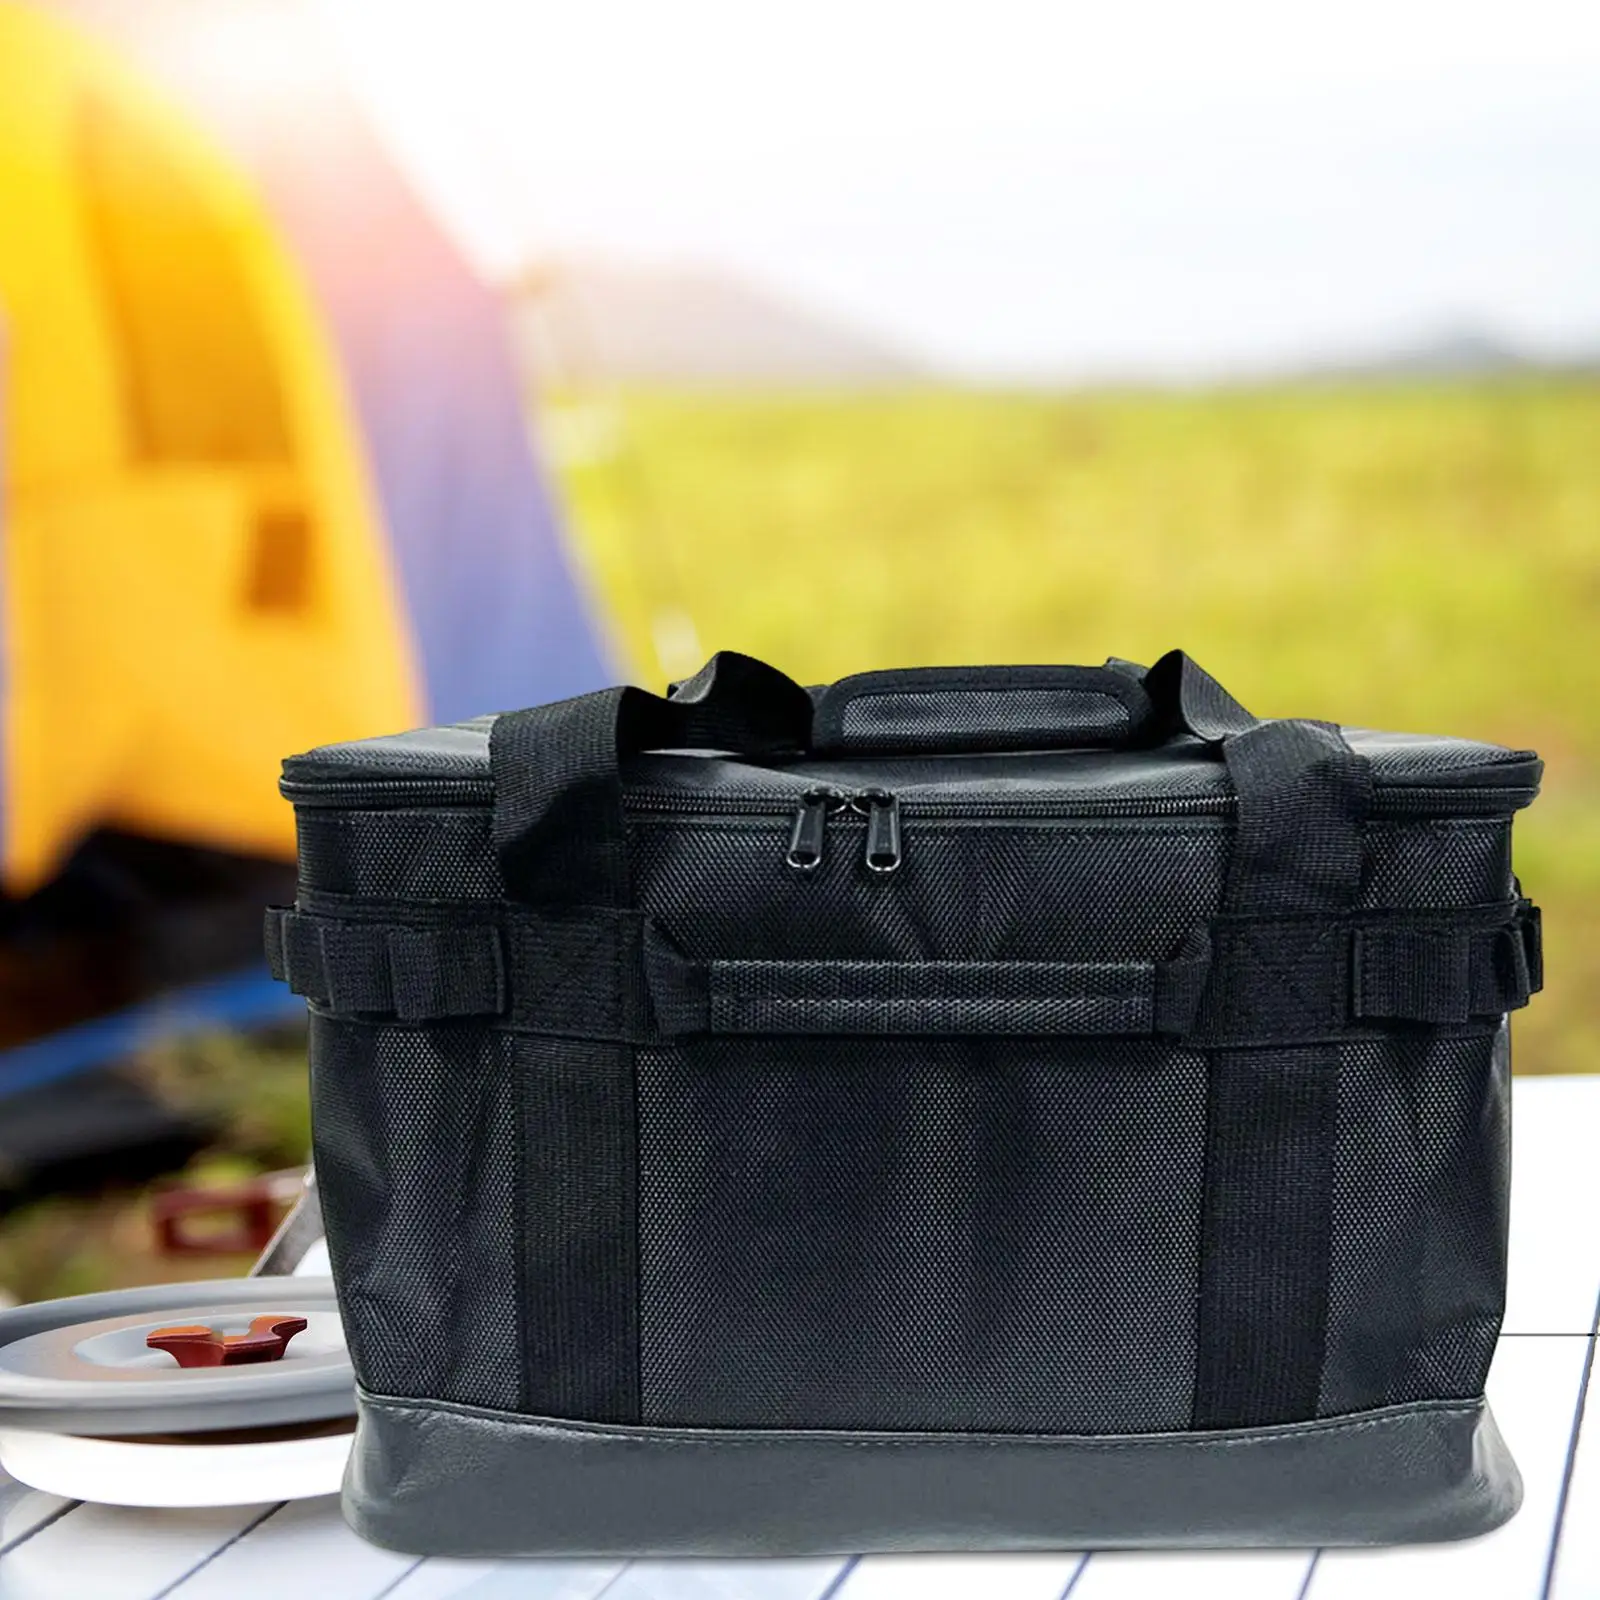 Multifunctional Camping Tool Storage Bag Folding with Carry Handles Shoulder Bag Utensils Organizer Package for Barbecue Hiking